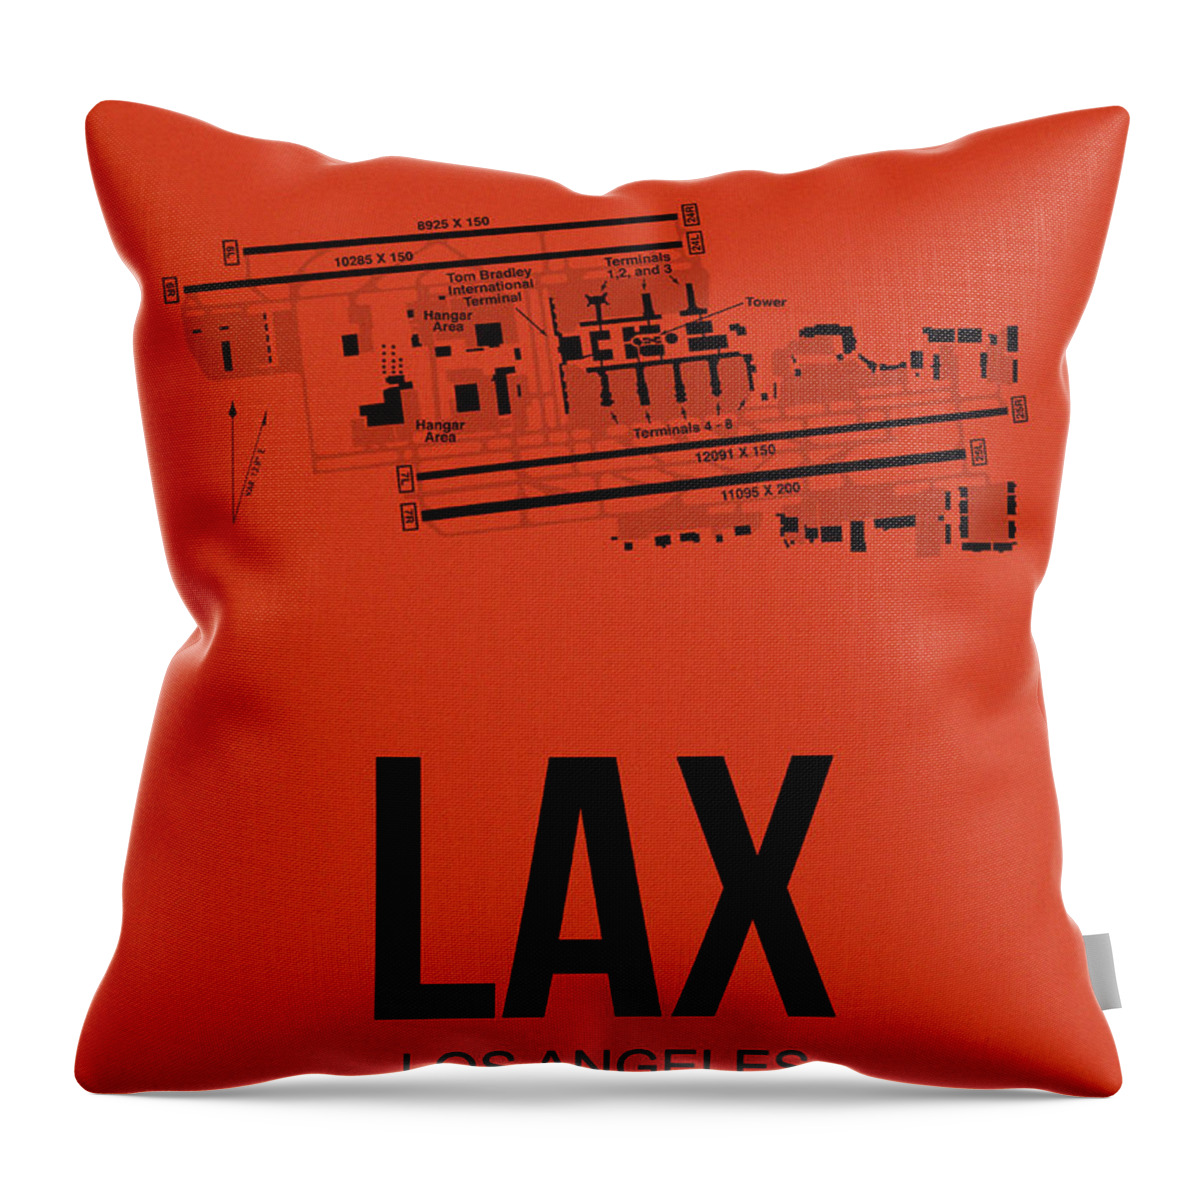 Los Angeles Throw Pillow featuring the digital art LAX Los Angeles Airport Poster 4 by Naxart Studio